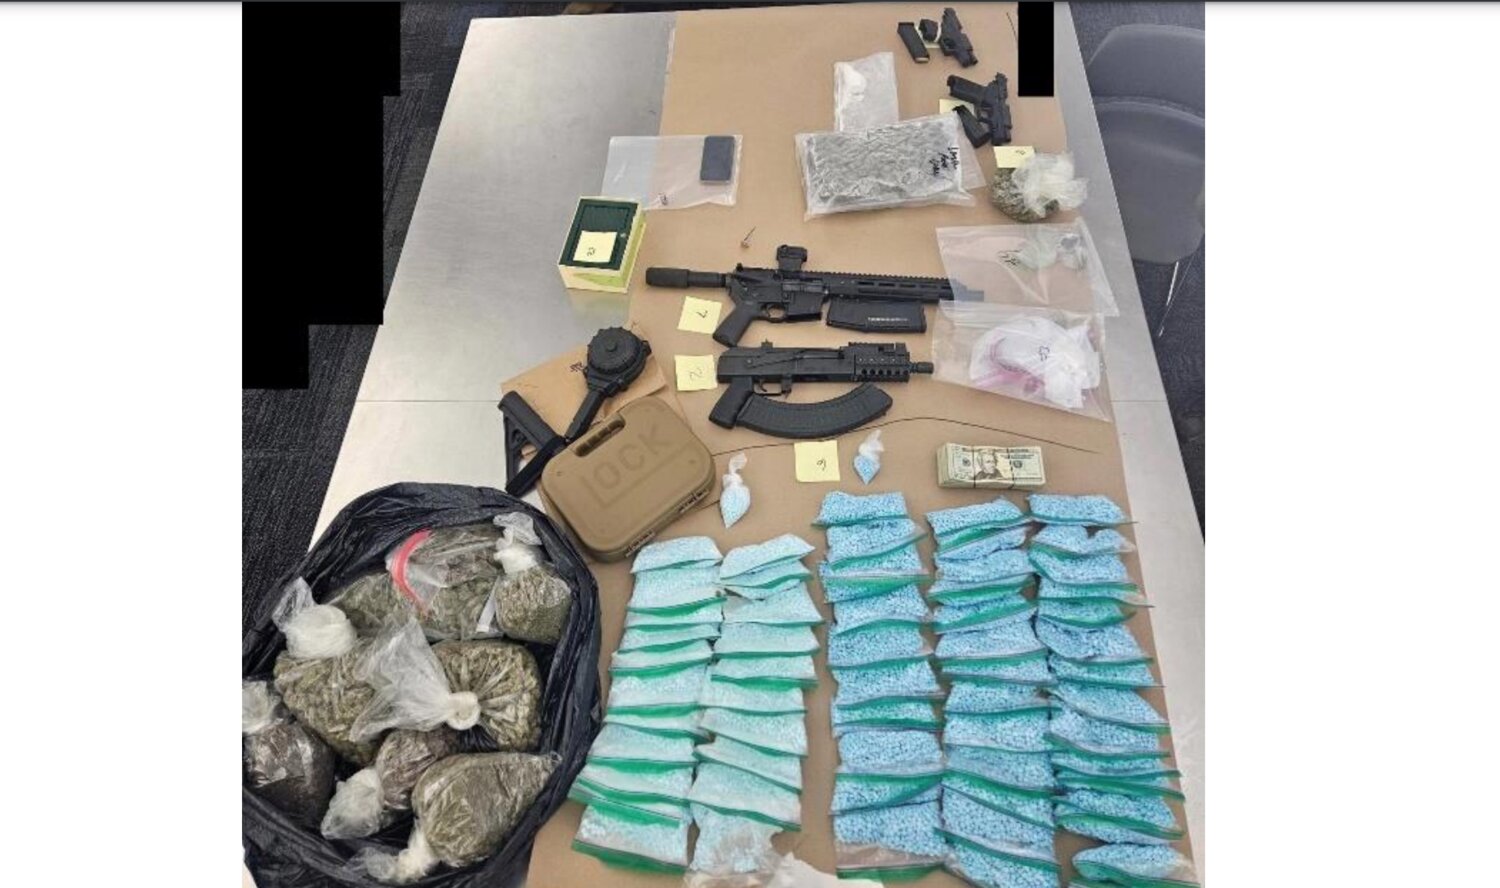 Drugs and weapons seized.